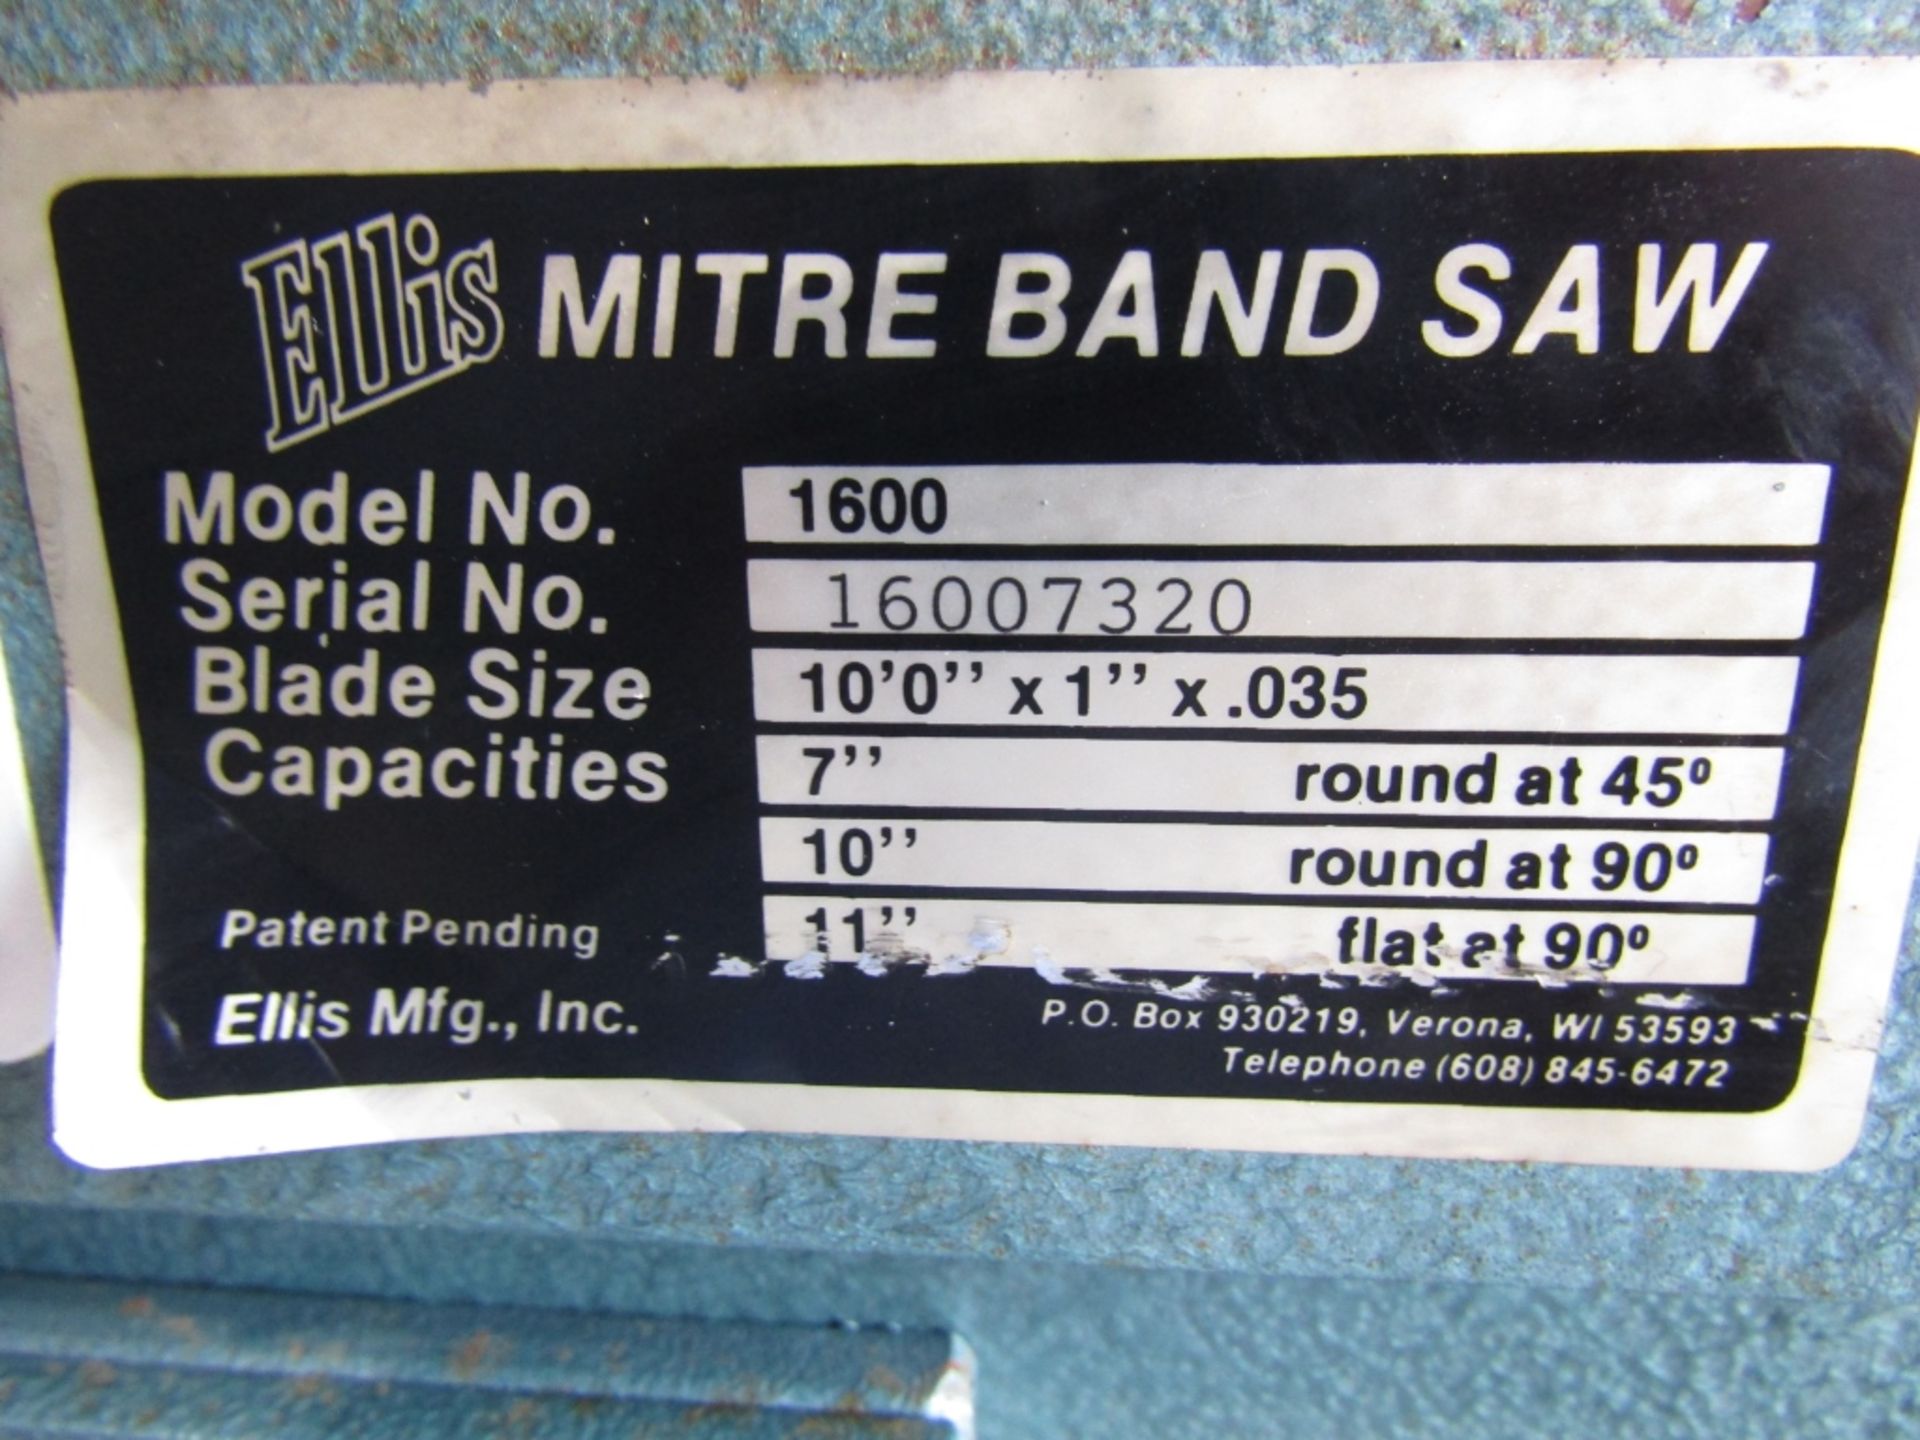 Ellis Mitre Band Saw, Model # 1600, Serial # 16007320, Blade Size 10" x 1" x .035, Cuts 7" @ 45 - Image 4 of 4